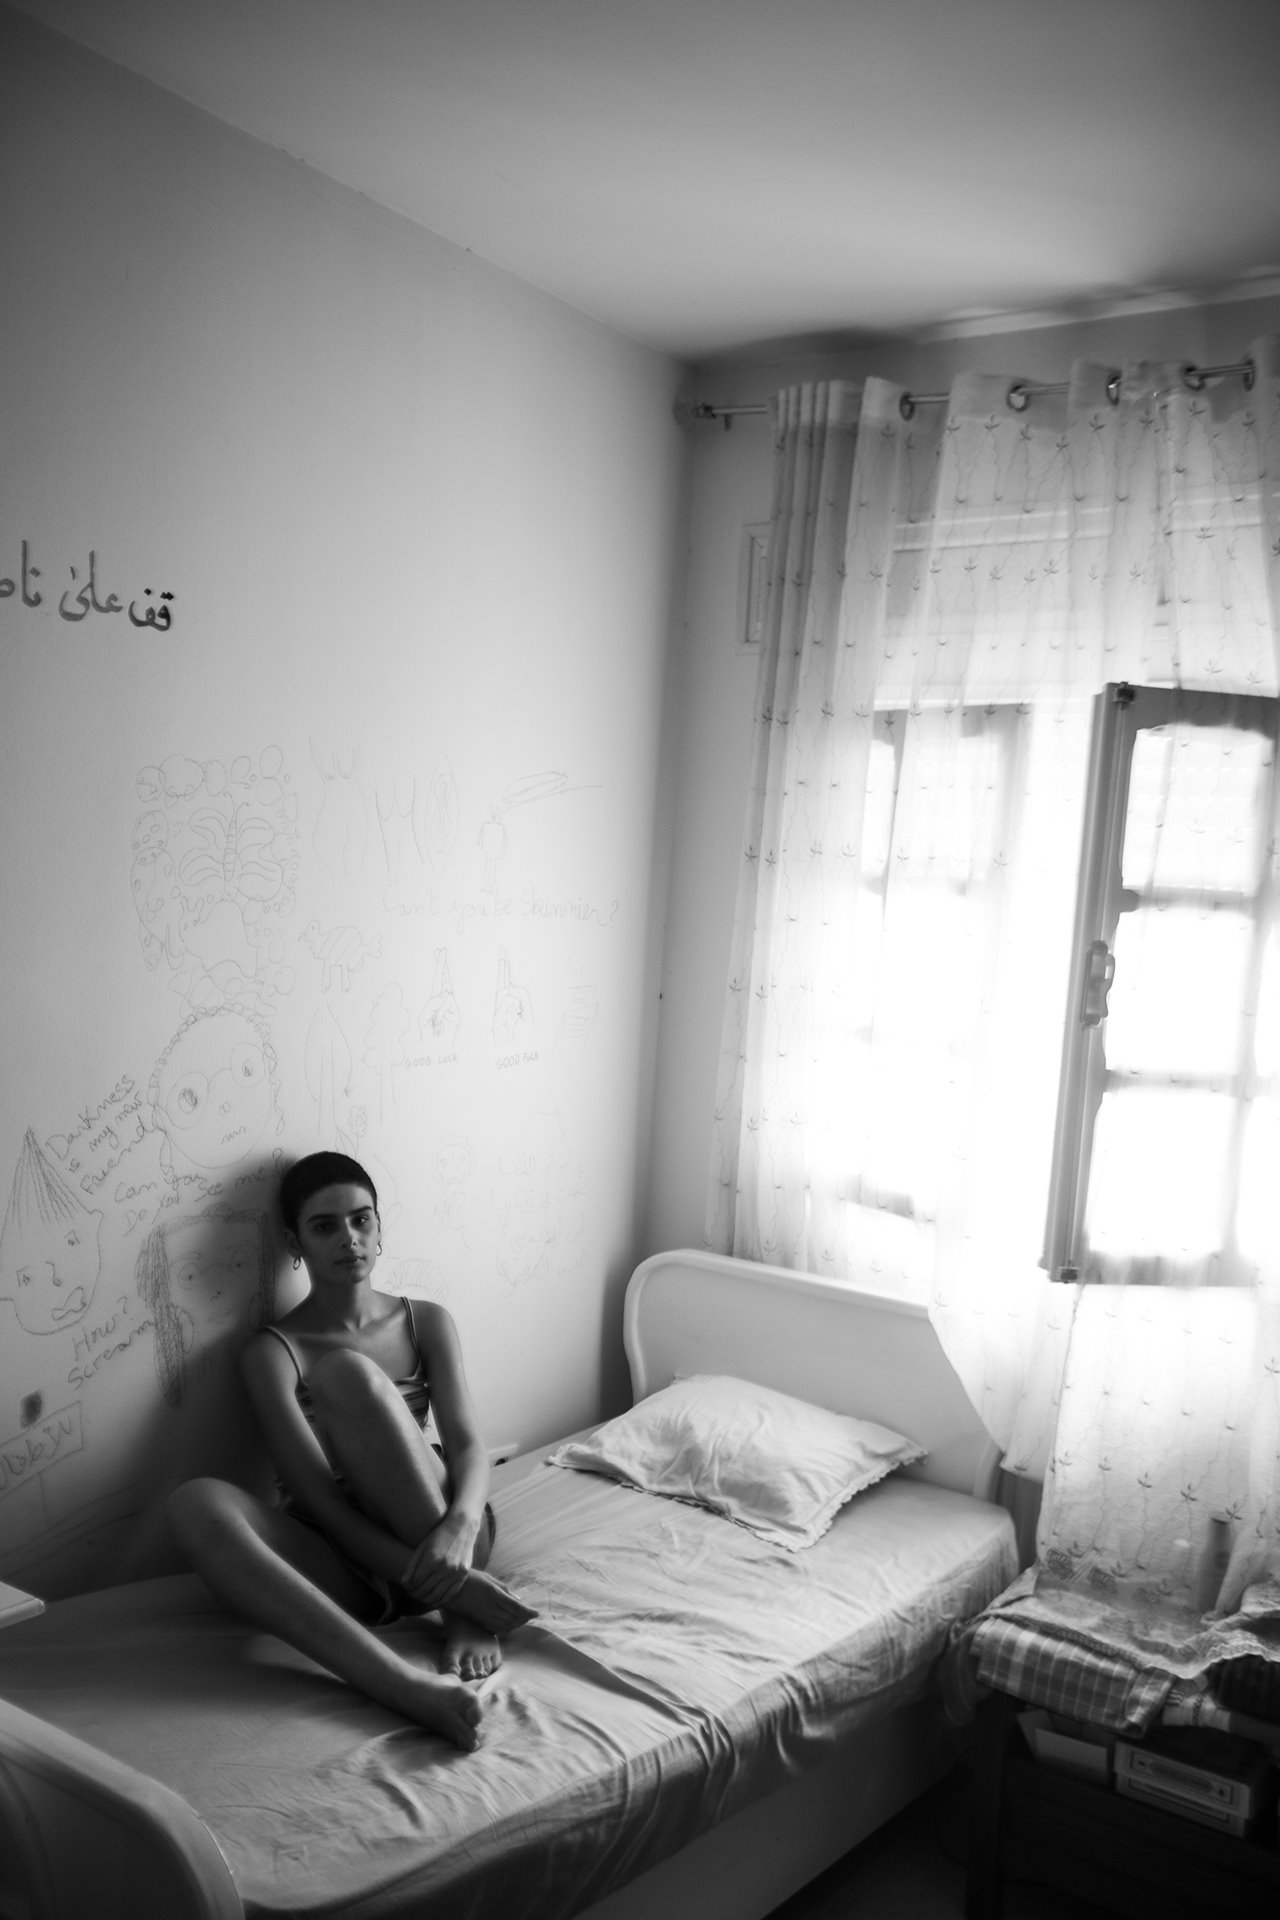 Nihed (23) lives with acute depression and post-traumatic stress disorder following family and personal issues, in Tunis, Tunisia. She expresses despair about her future in Tunisia, saying: &quot;Tunisia does not belong to us, it is reserved for influential and wealthy people.&quot;